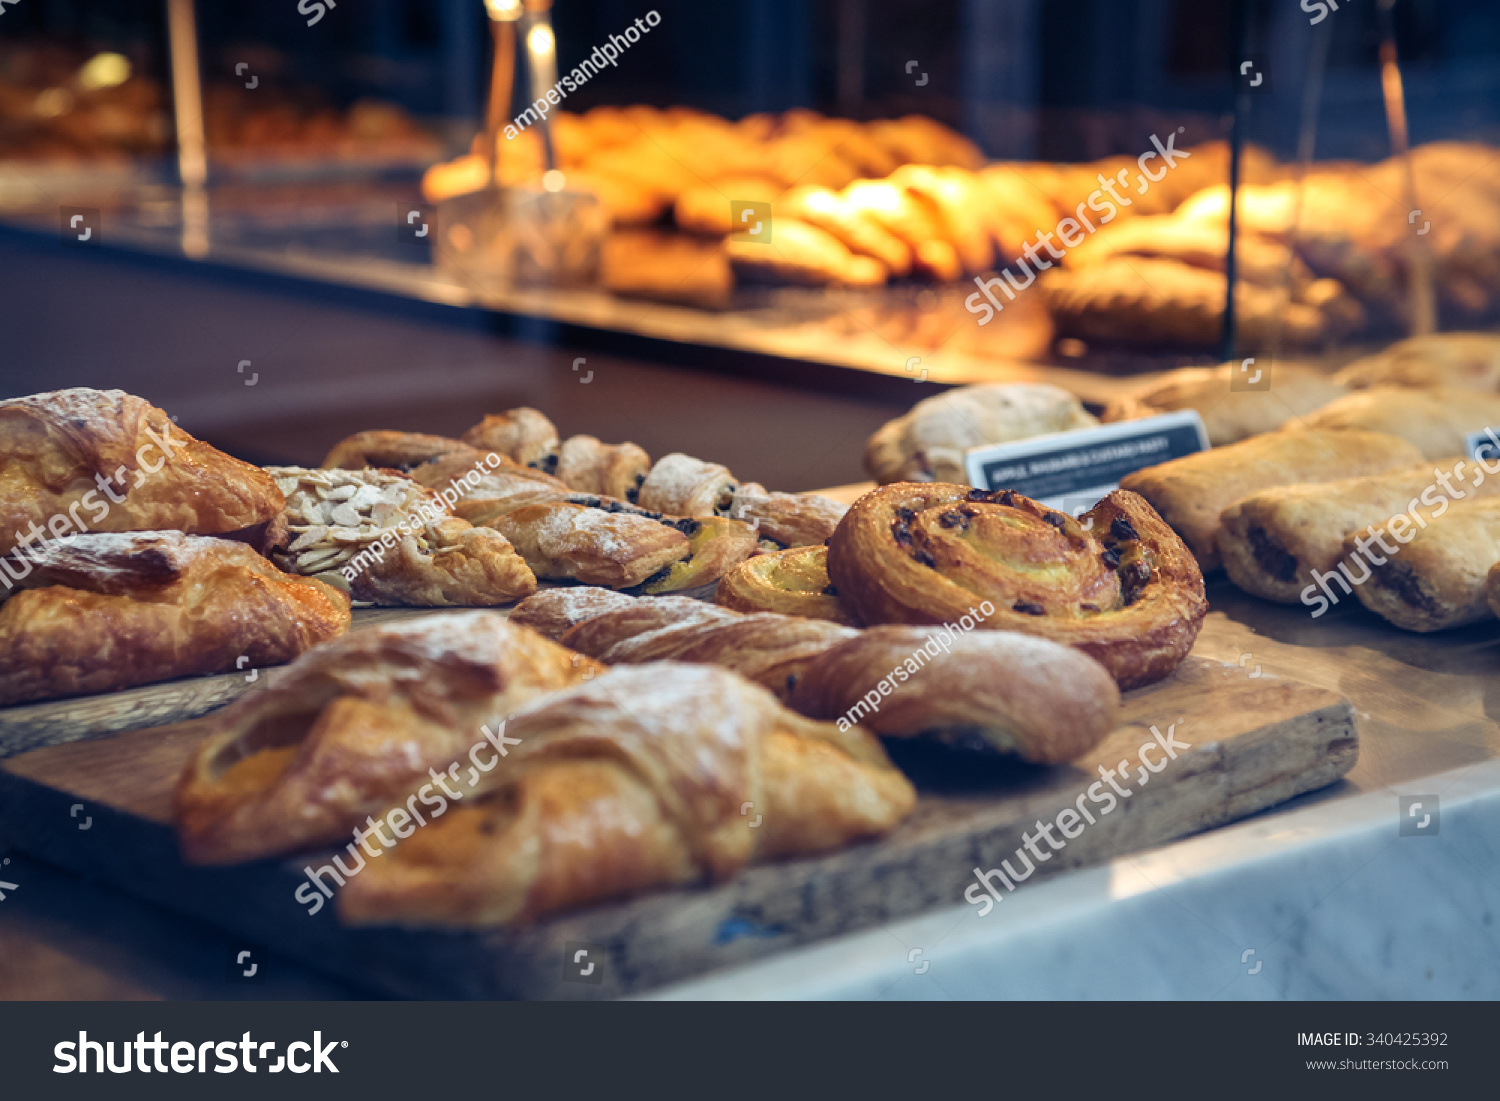 Pastries in a bakery window #340425392